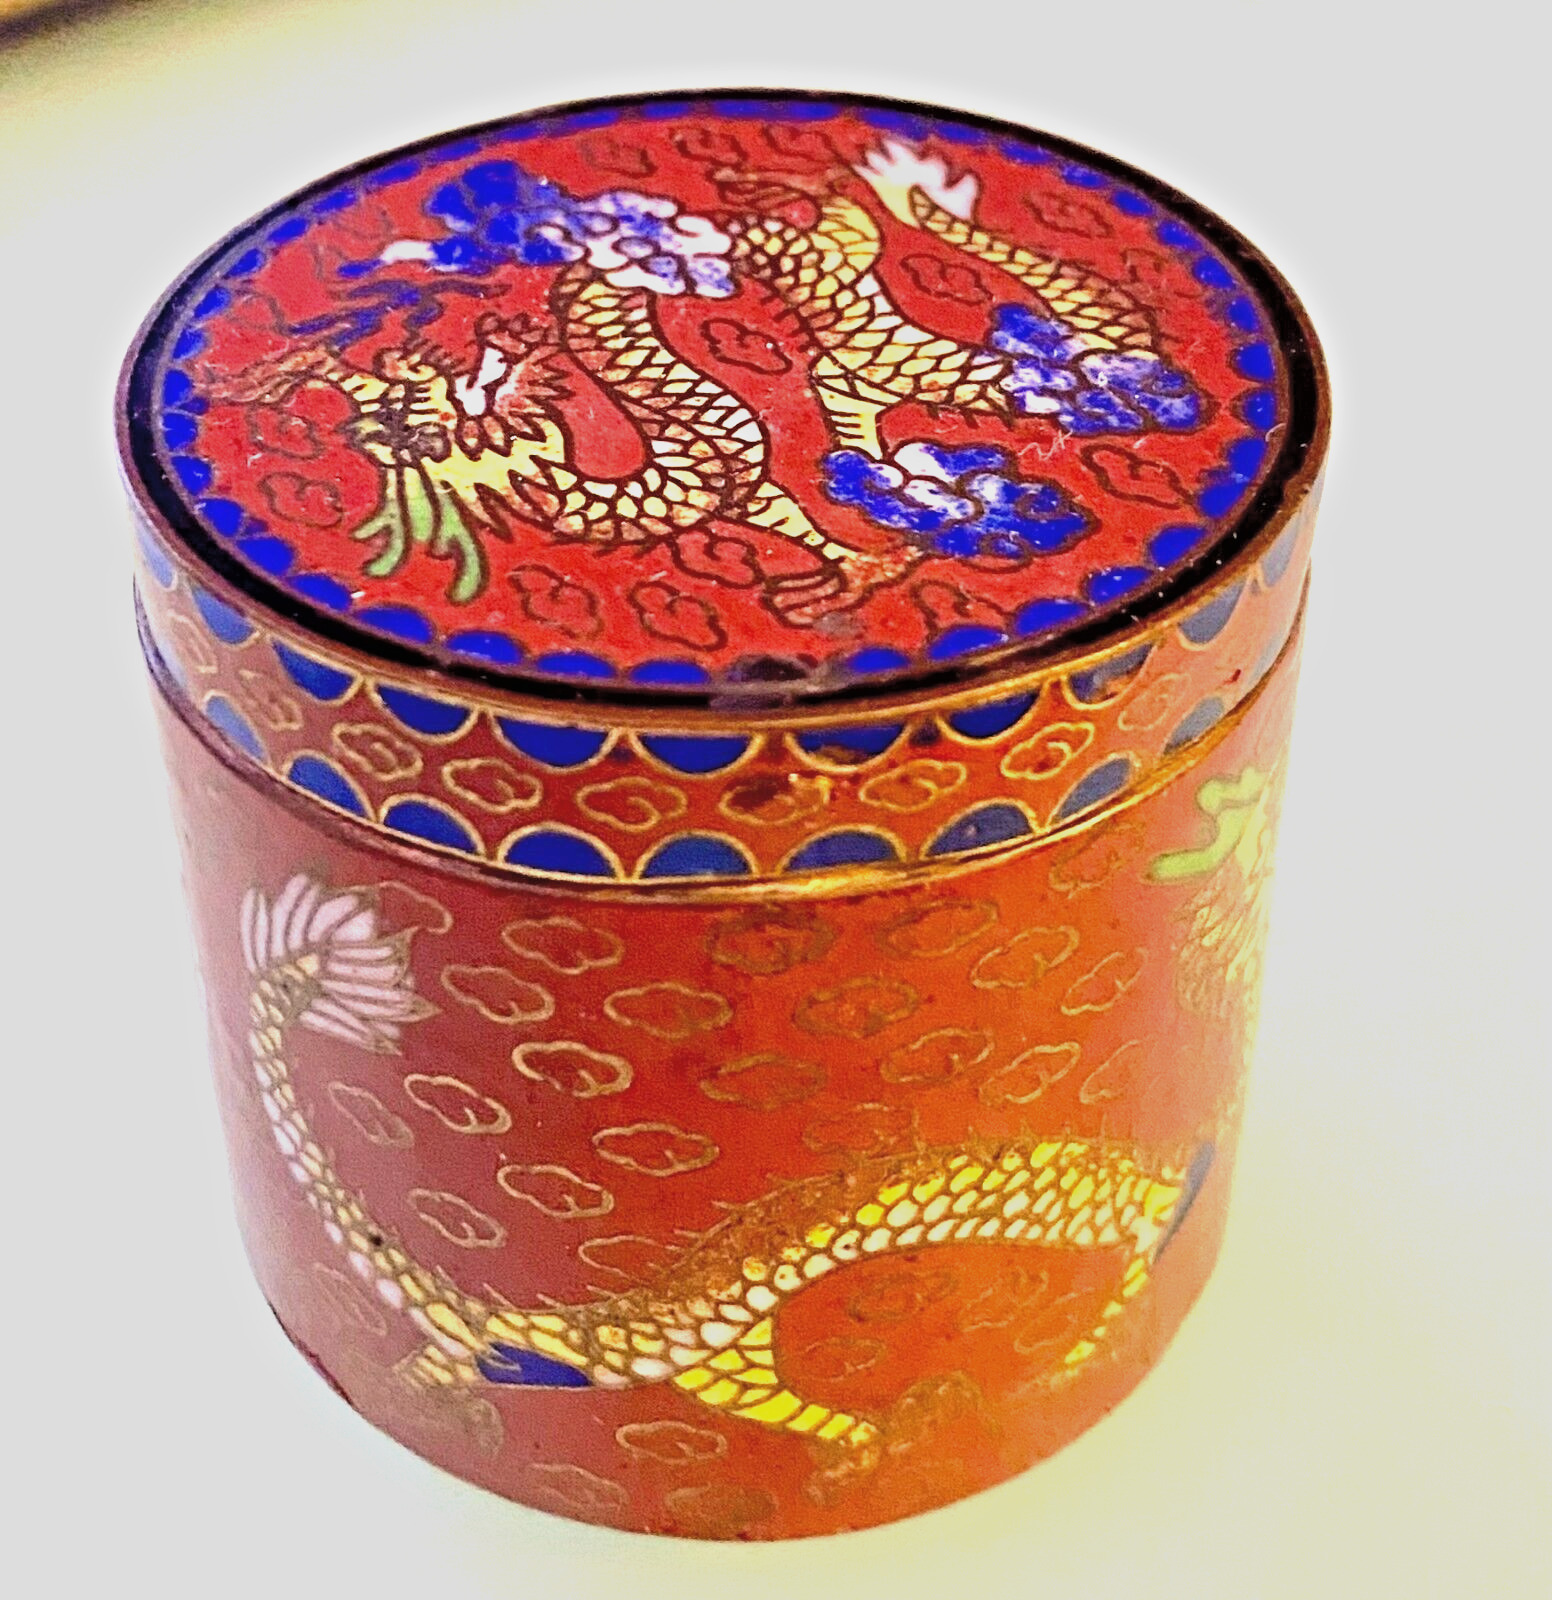 RARE CHINESE SNUFF TRINKET BOX IN CLOISONNE BRONZE AND GILDING DRAGONS c1930 g.